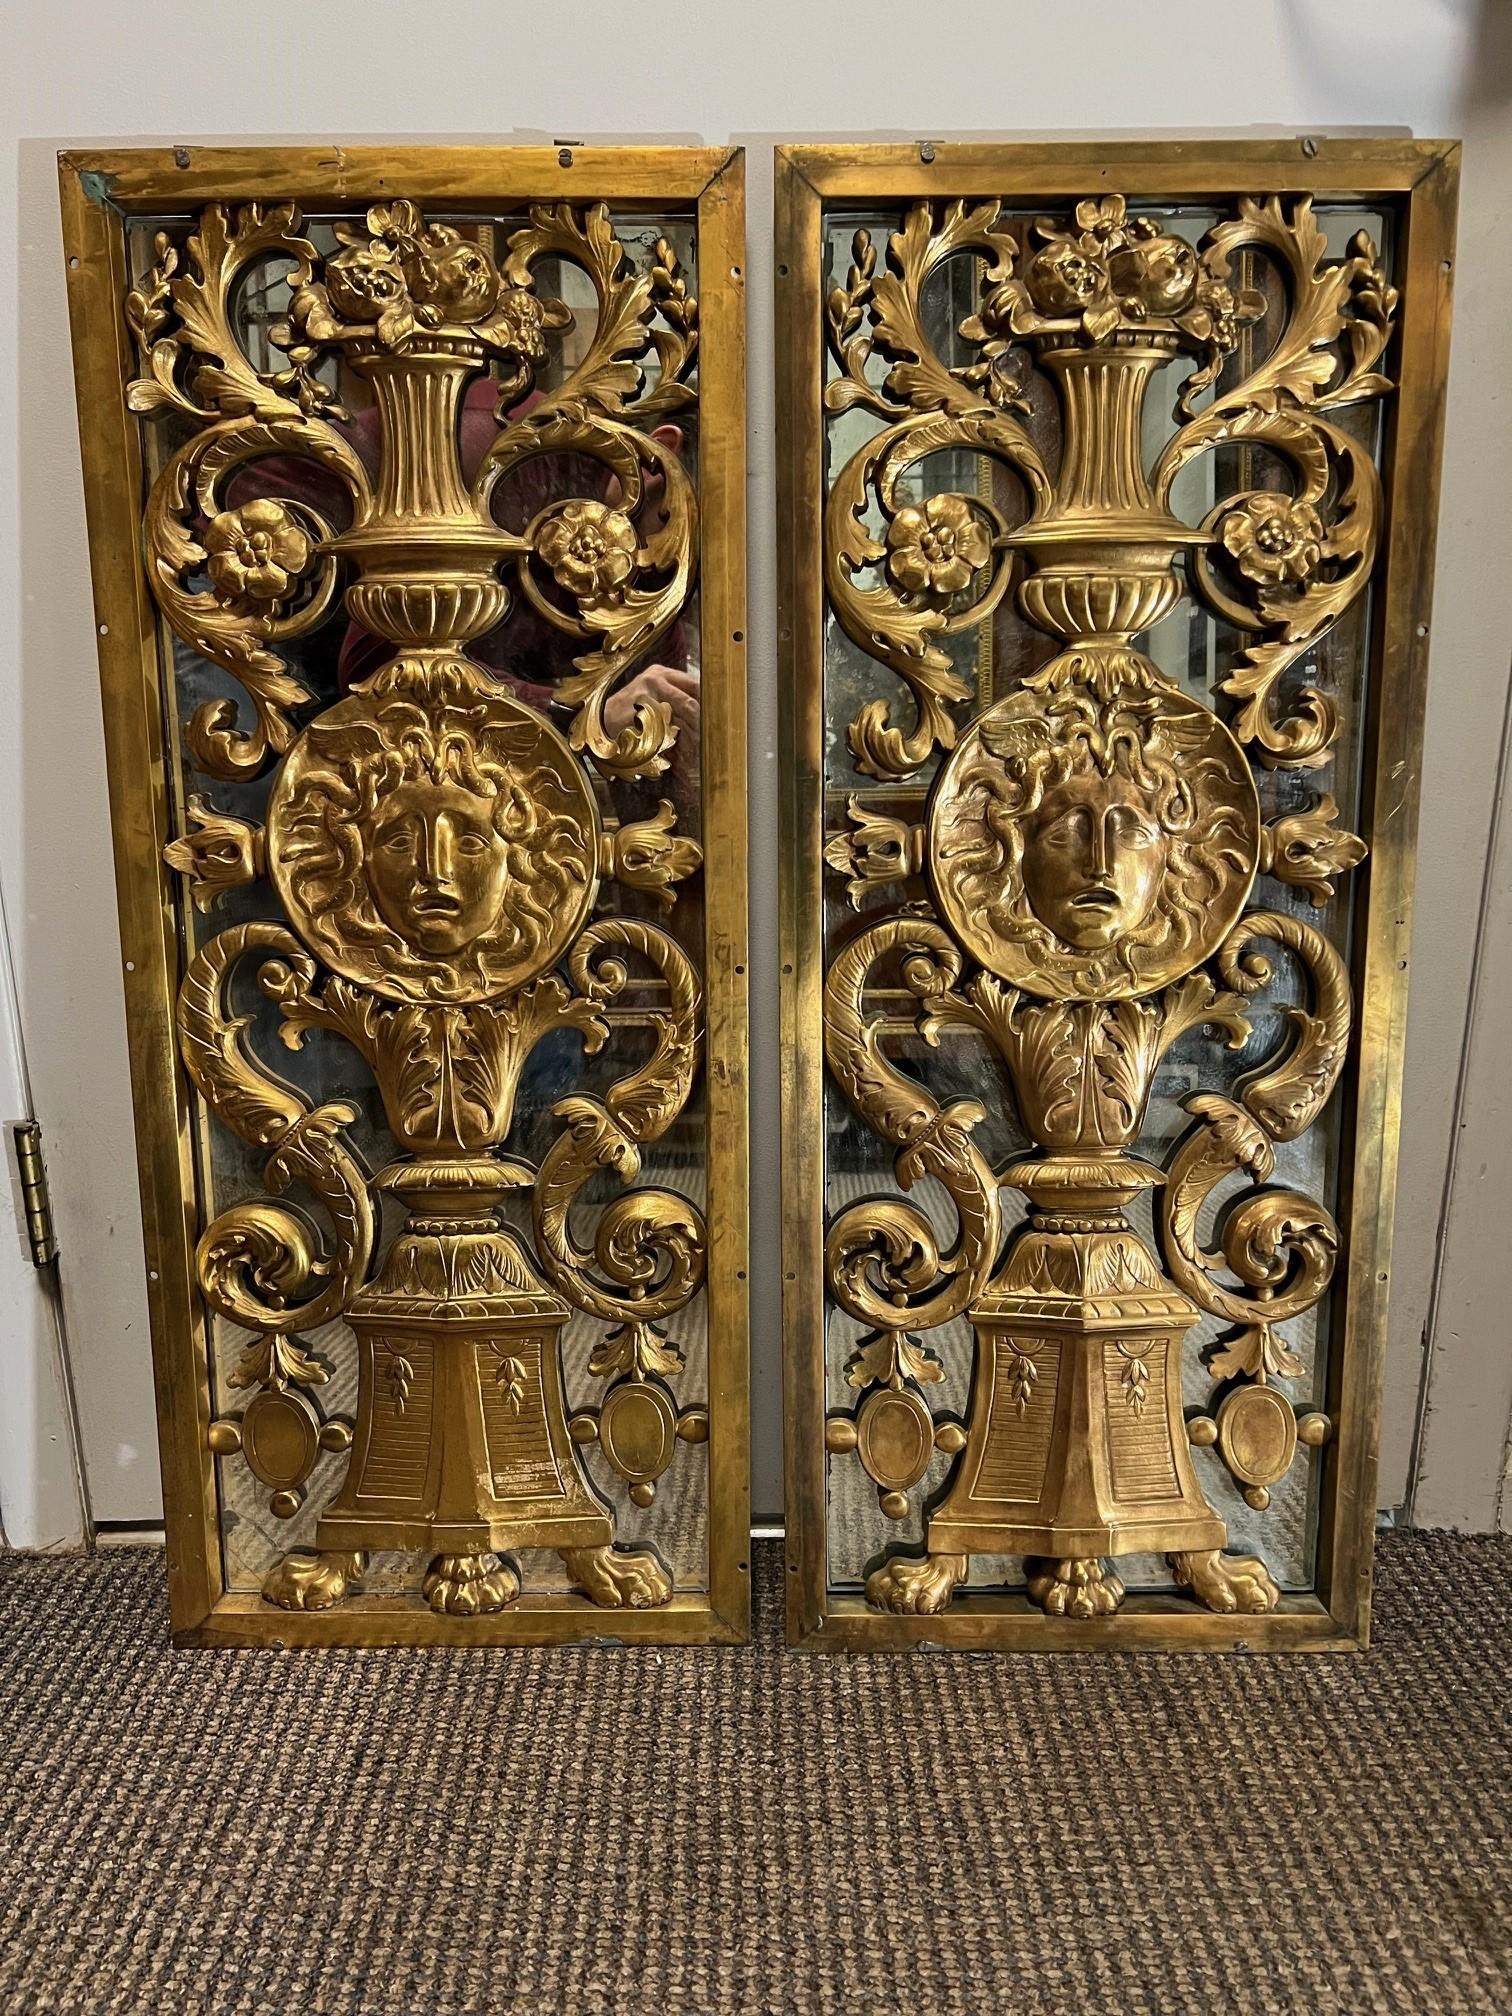 Very ornate pair of 19th century antique cast bronze panels with the face of Medusa in the center. In the panel the bottom has a footed pedestal with a urn above and beautiful flowers and scroll work. Medusa in Greek mythology also called Gorgo, was